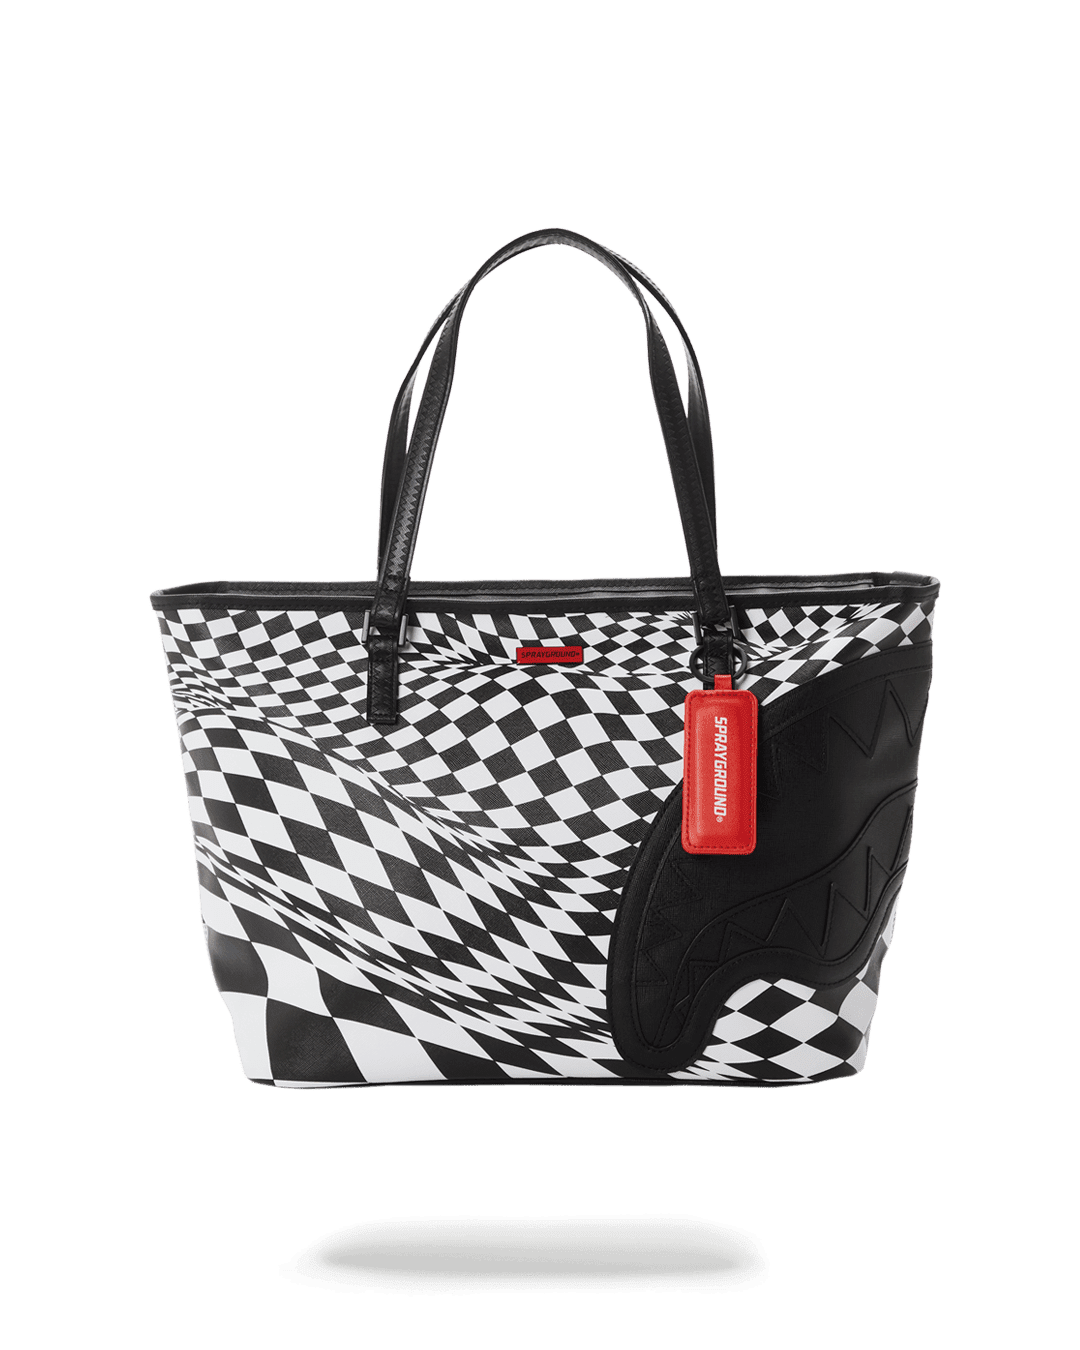 TRIPPY TOTE